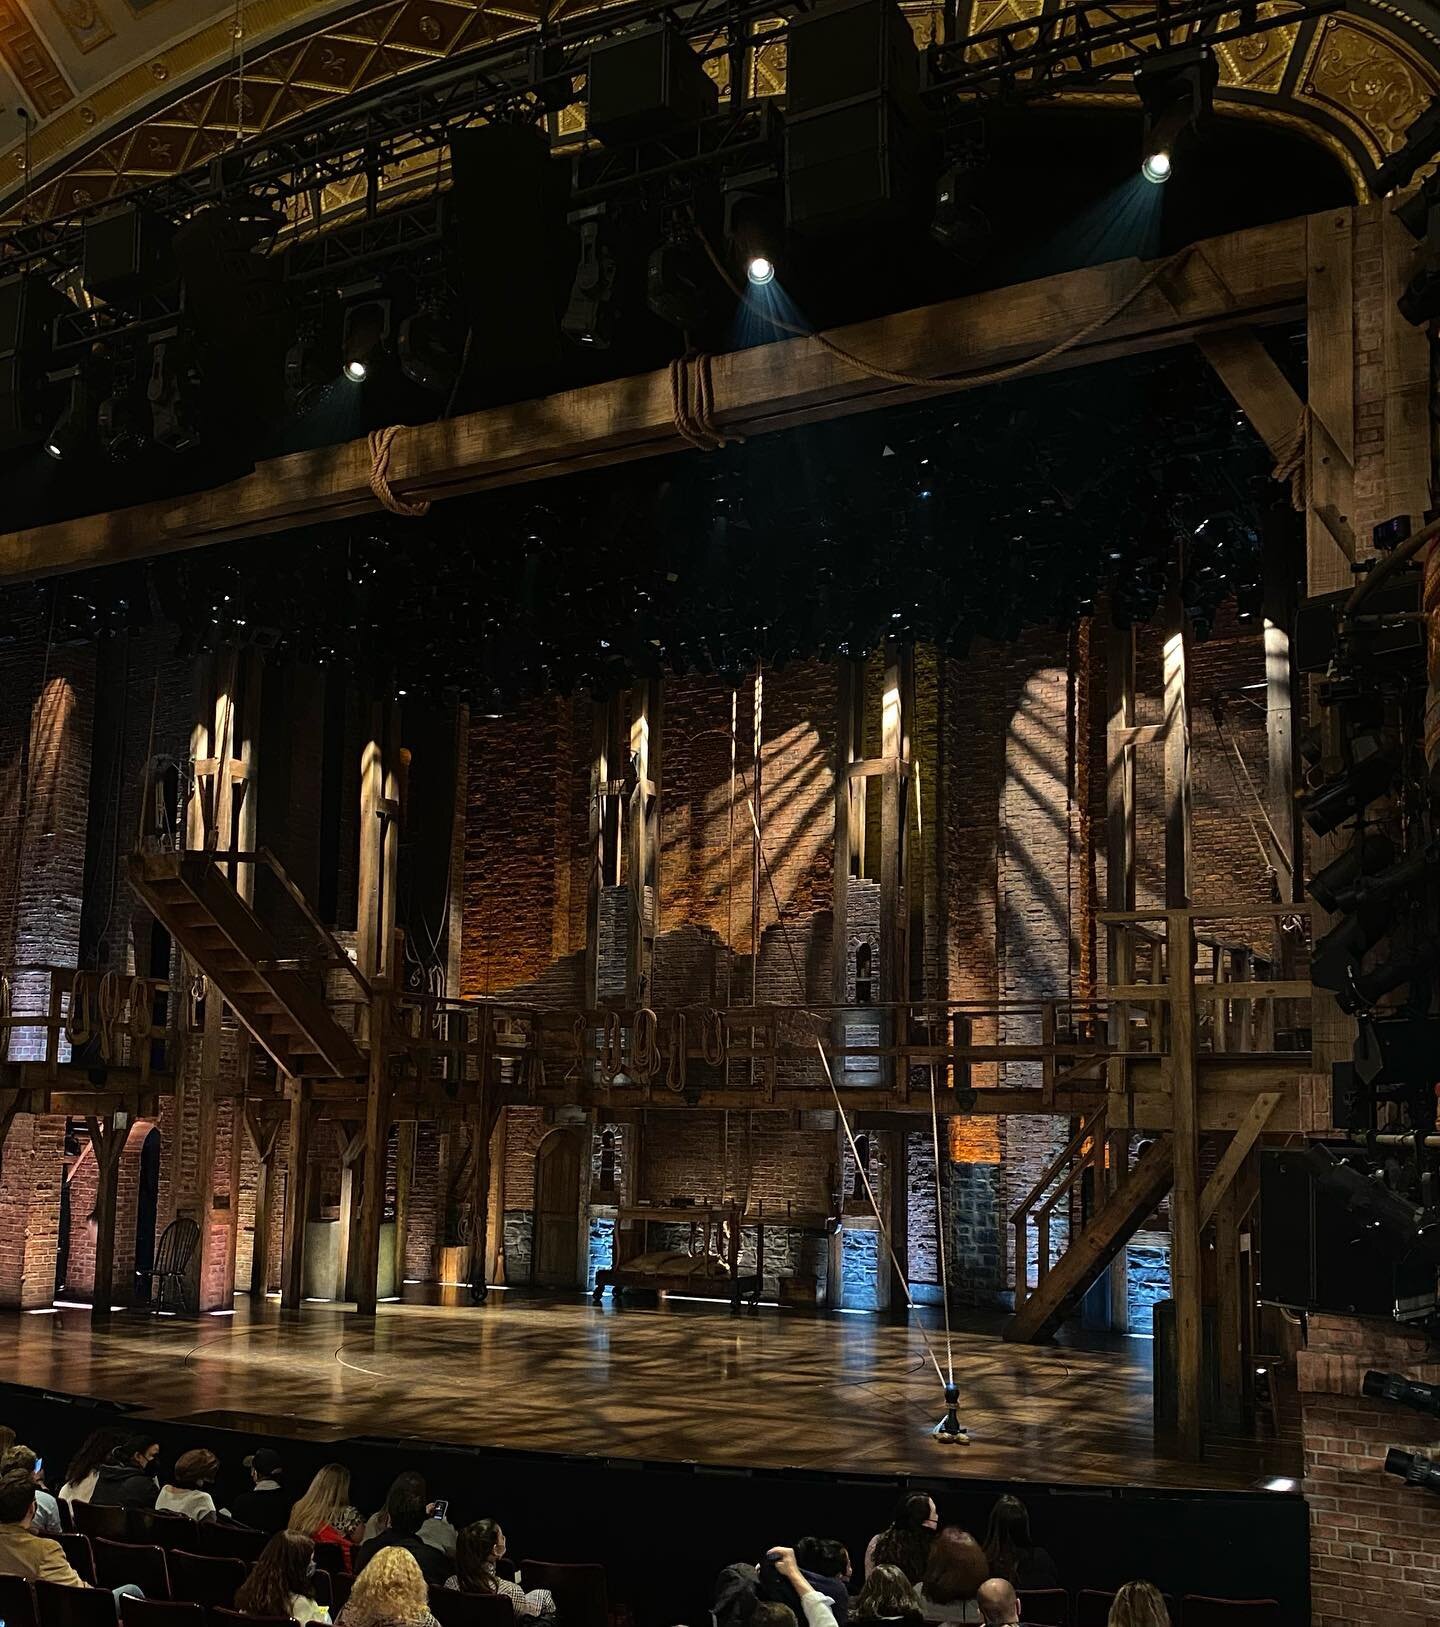 Night out to see Hamilton once again with beautiful and expressive lighting by the late Howell Binkley. Love this show #hamiltonmusical #broadway #lightingdesign